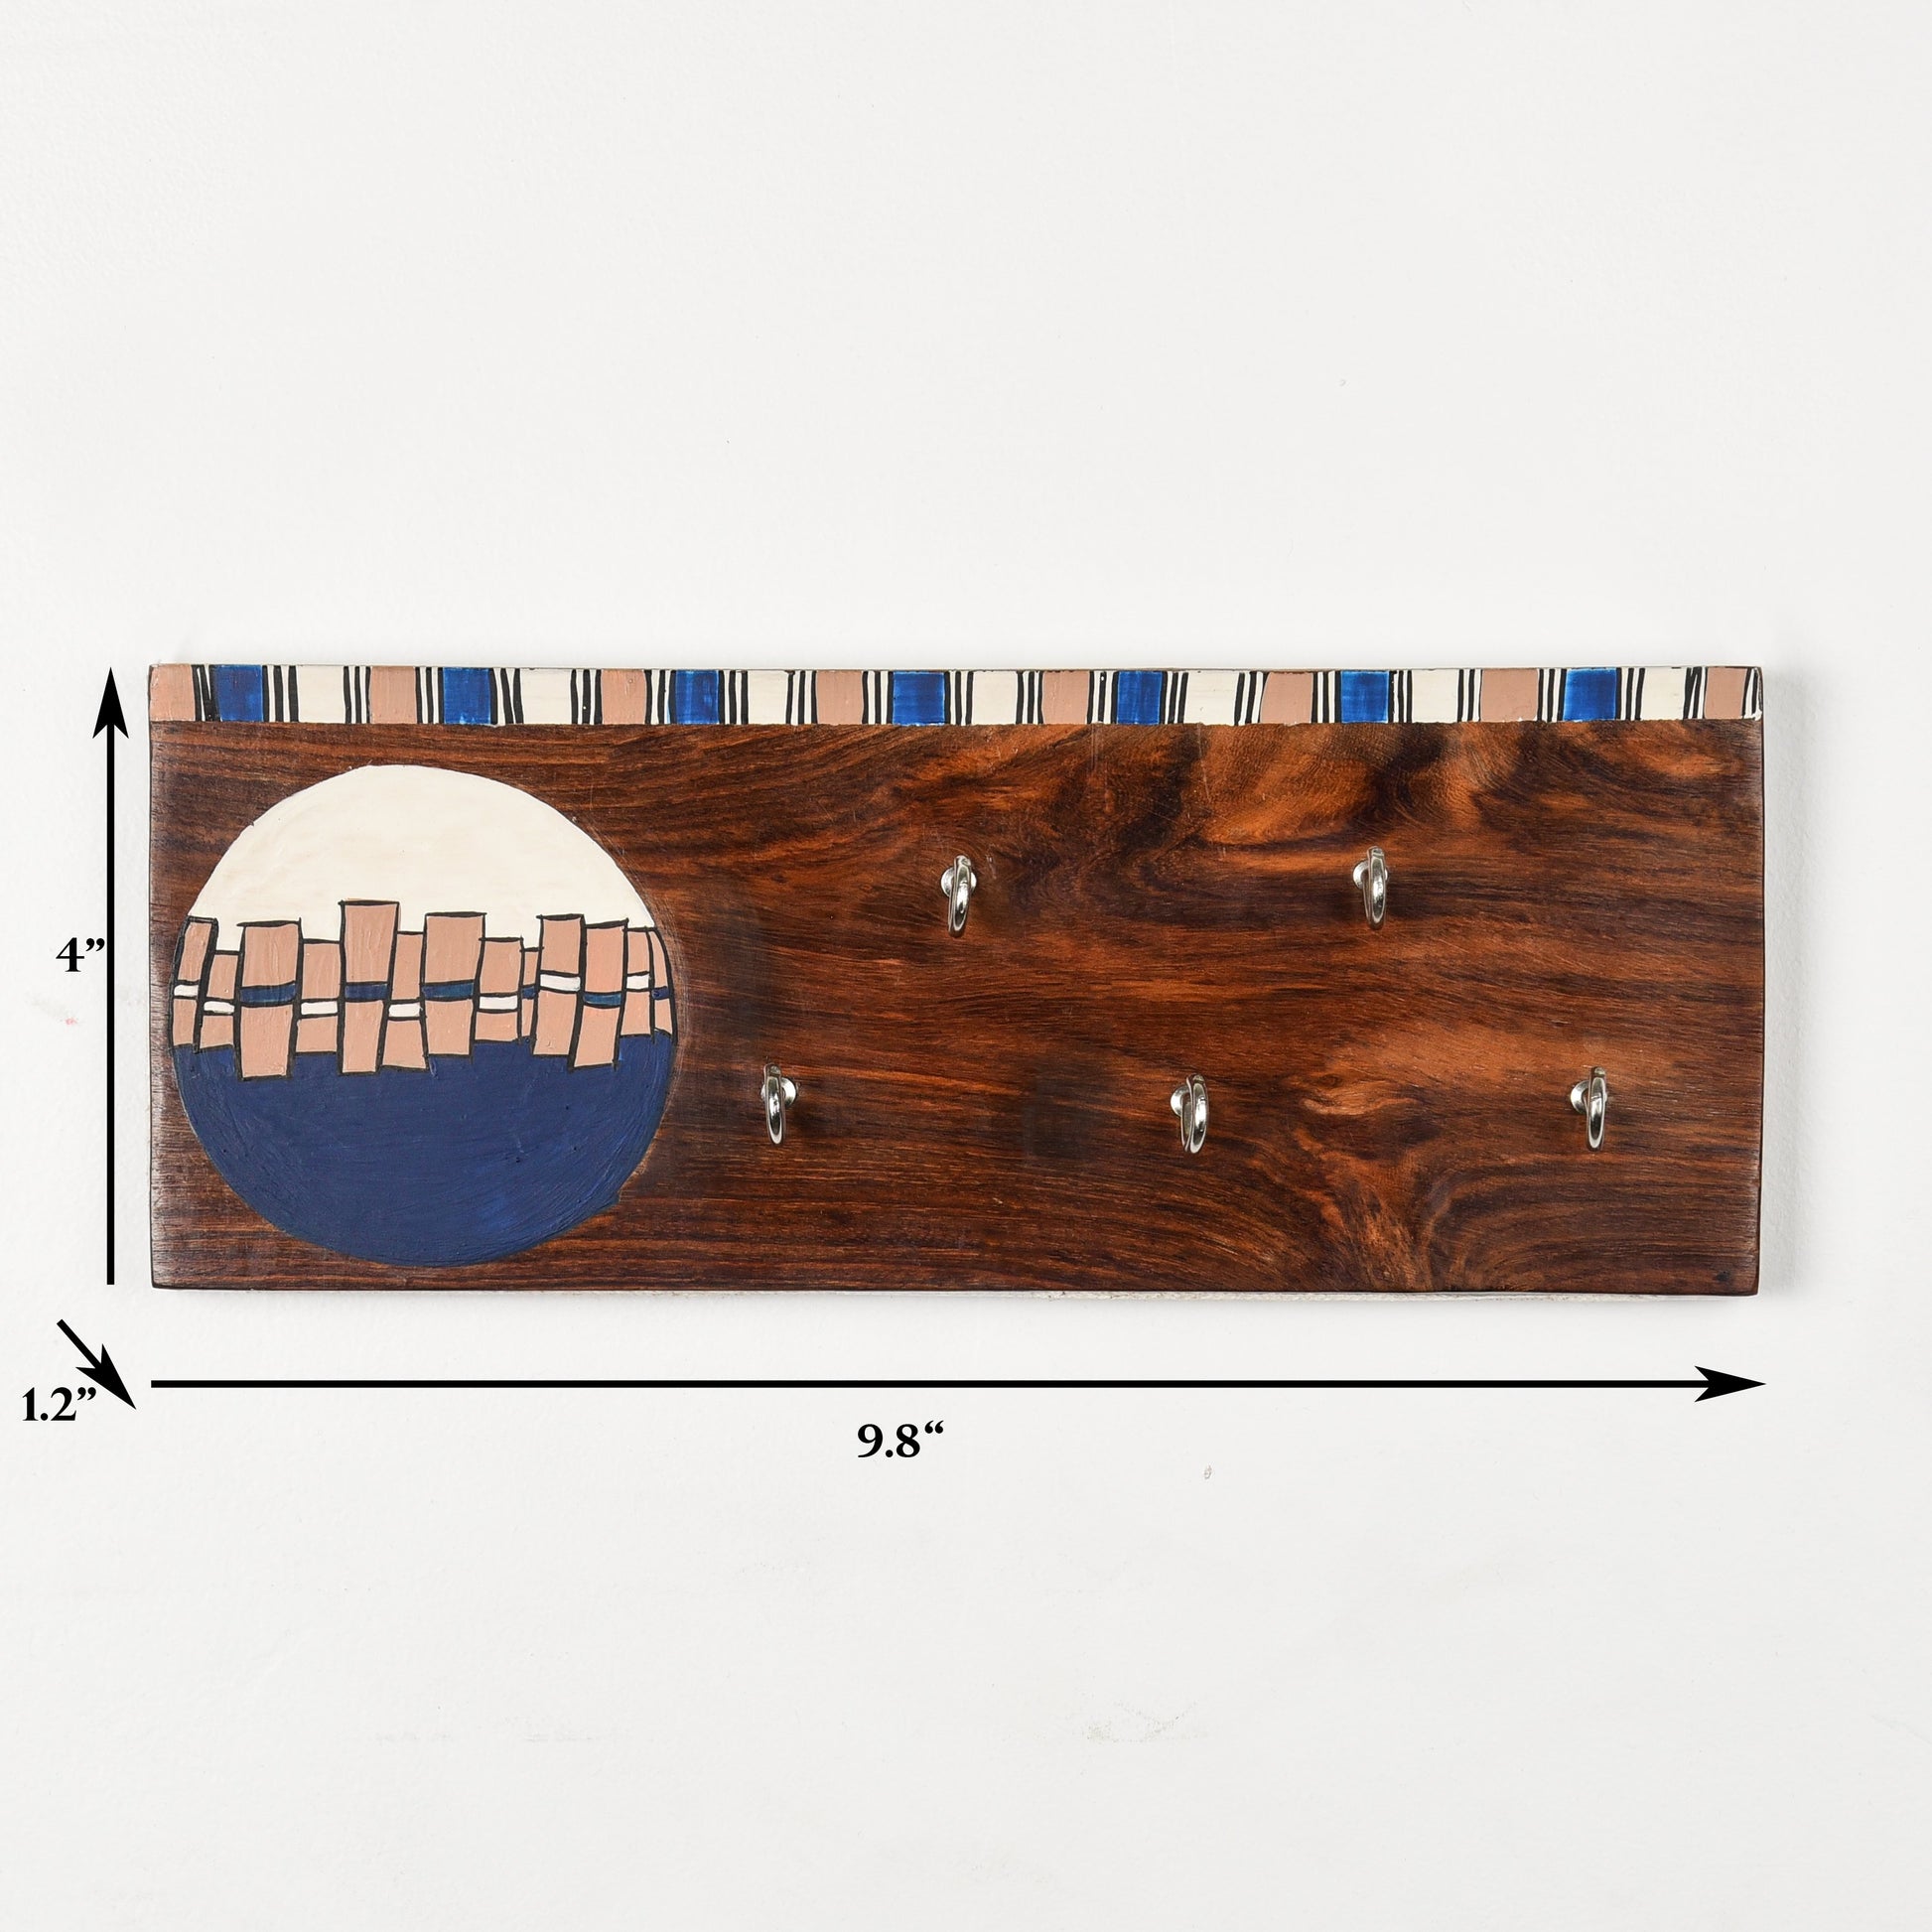 'Abstract Art' Handcrafted Wooden Decorative Key Holder